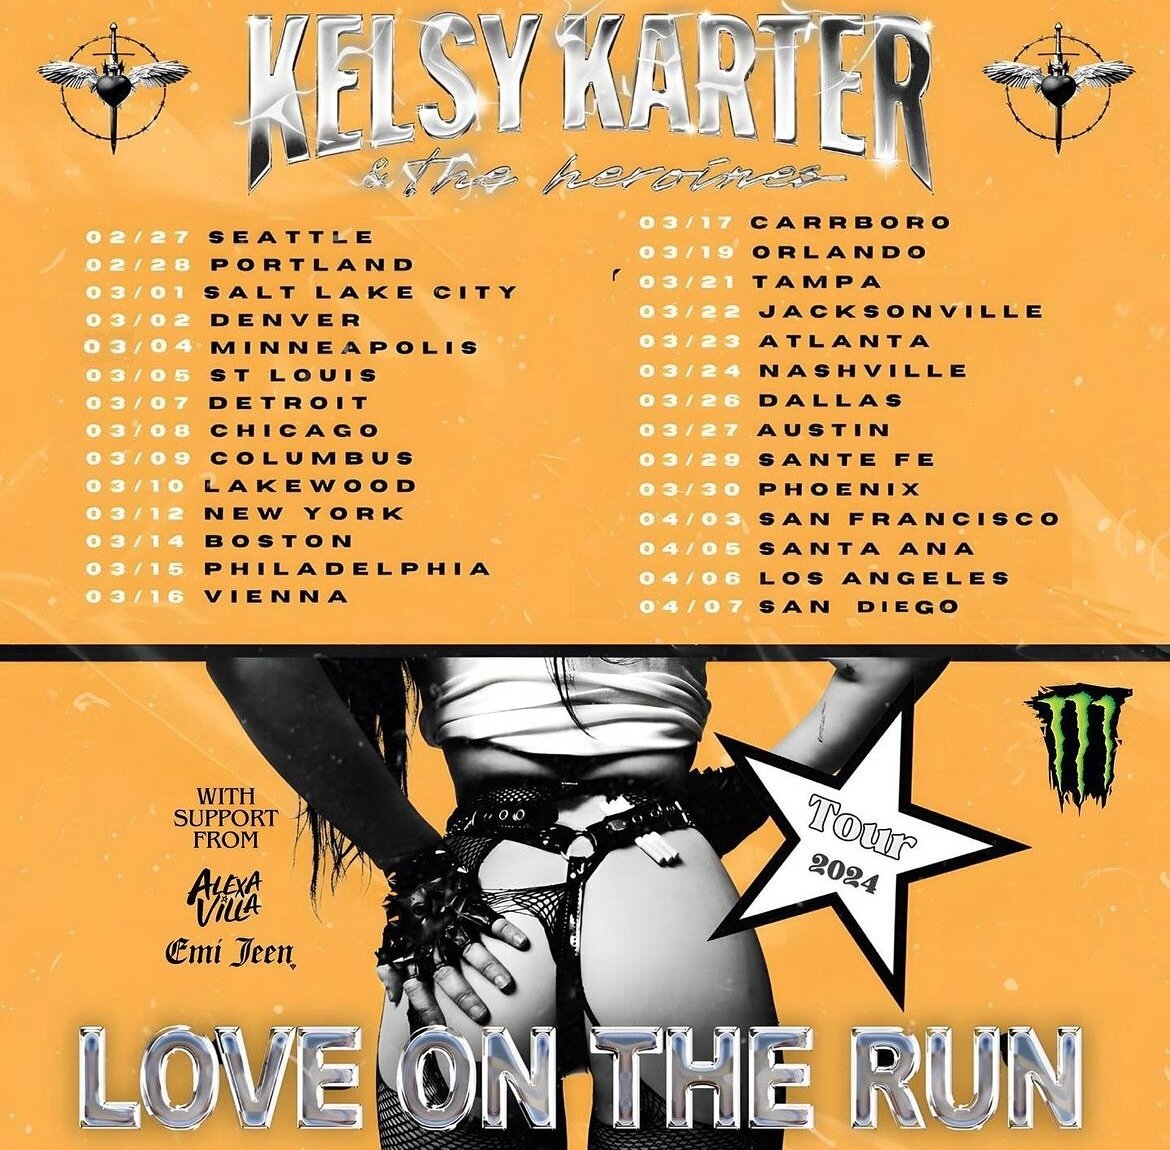 Do you have your tickets yet to see Kelsy Karter &amp; The Heroines yet? The Love On The Run Tour starts in a few weeks! Get yours NOW!